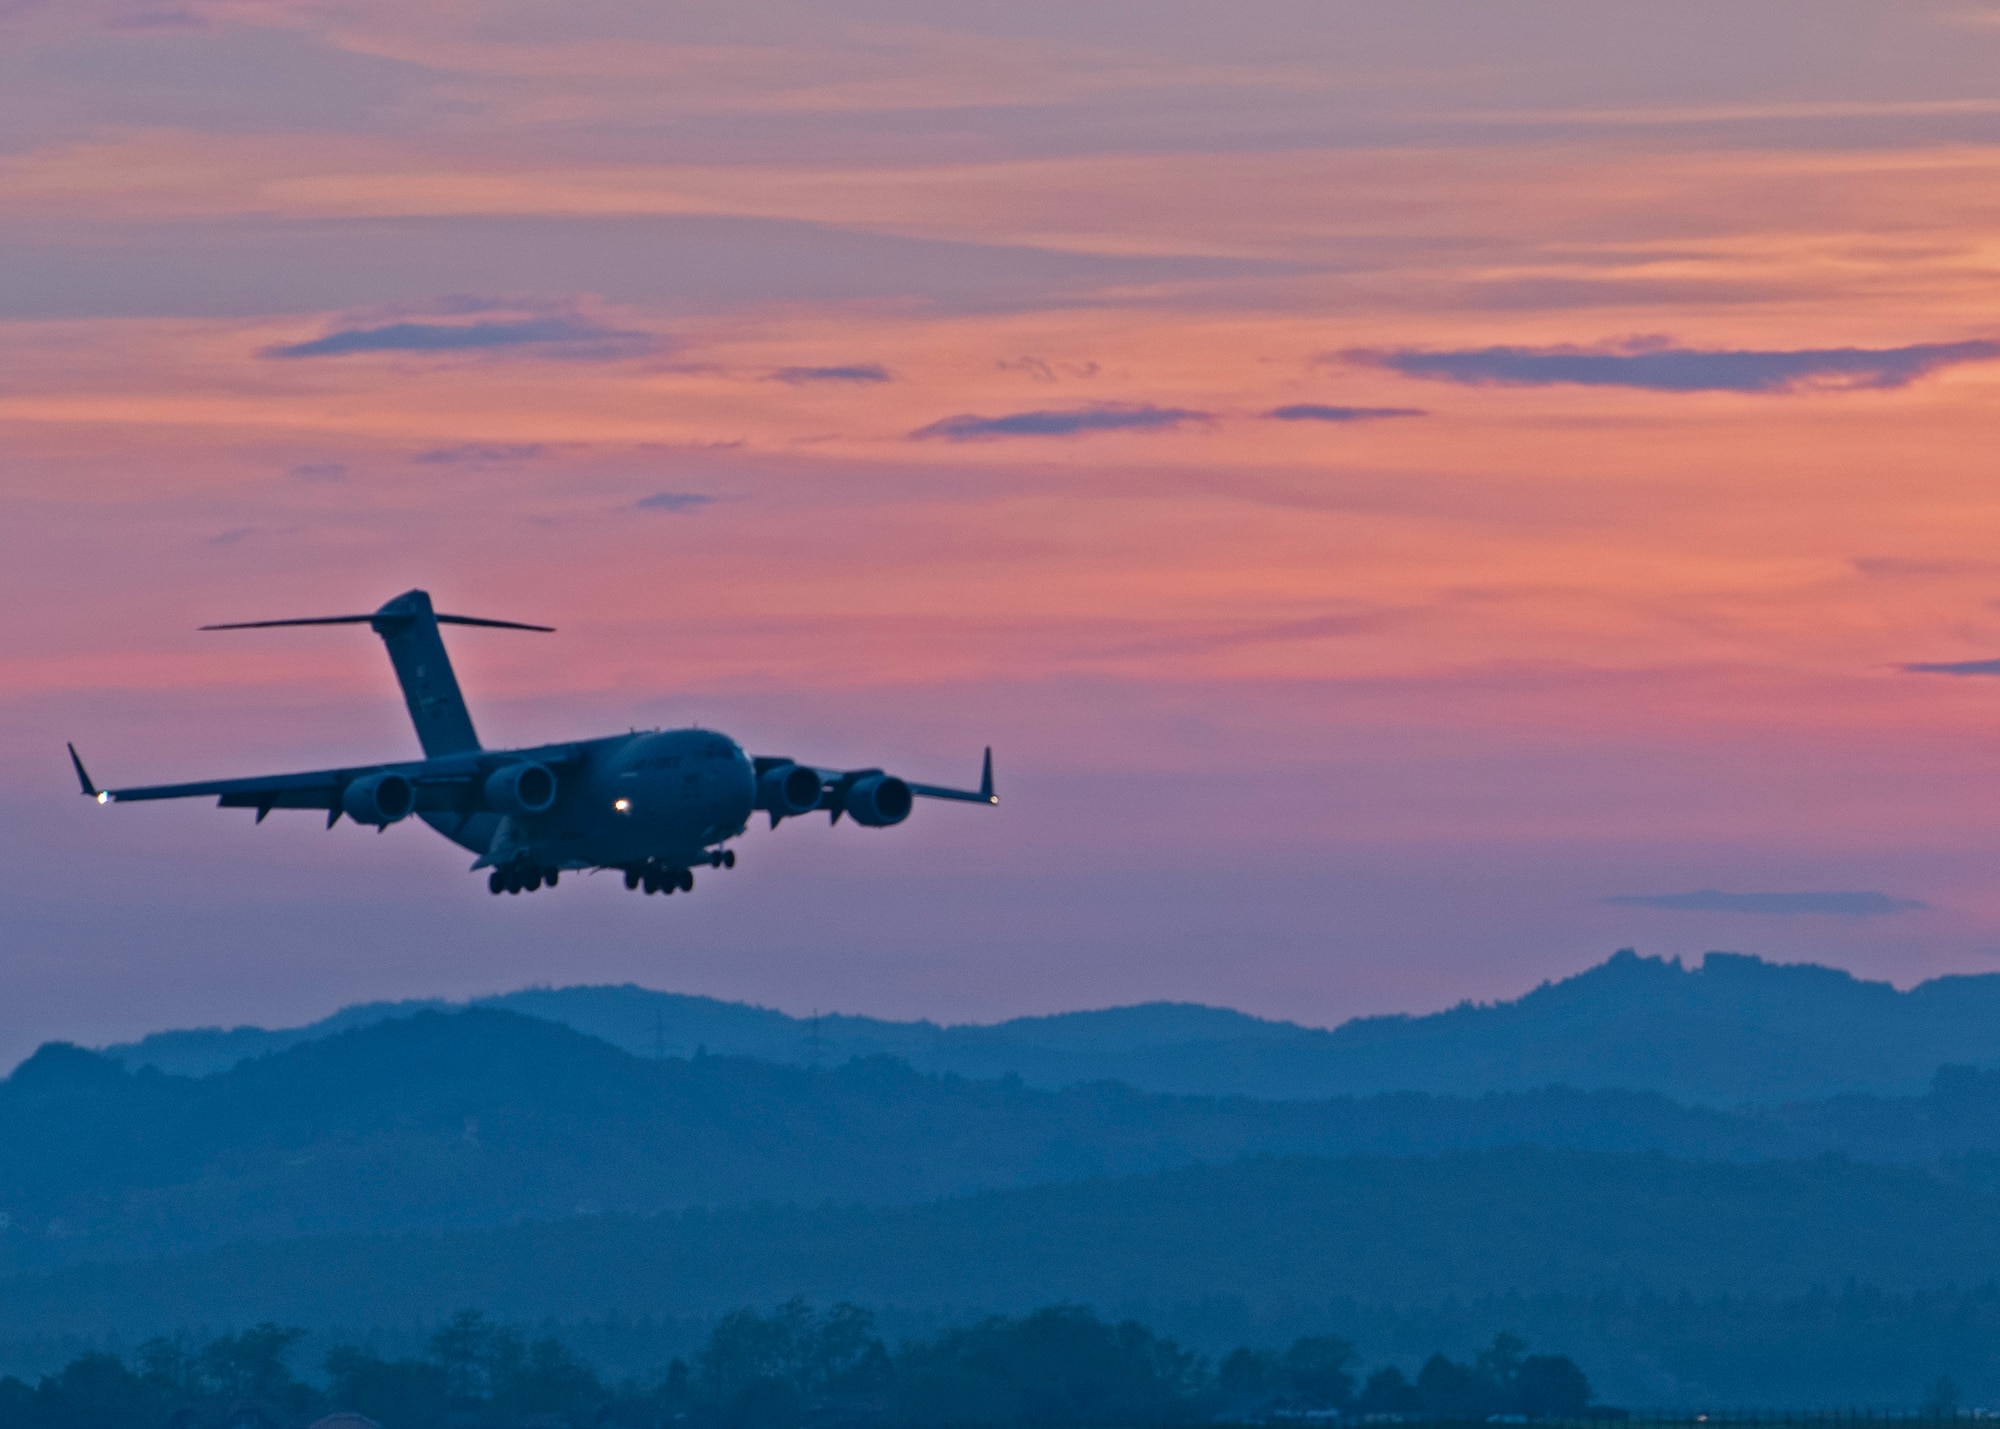 A C-17 Globemaster III prepares to land during Exercise Swift Response at Cerklje Air Base, Slovenia, May 10, 2022. Approximately 9,000 service members from 17 Allied and partner nations will participate in Swift Response, including approximately 2,700 U.S. Soldiers and Airmen. (U.S. Air Force photo by Staff Sgt. Zoe Thacker)